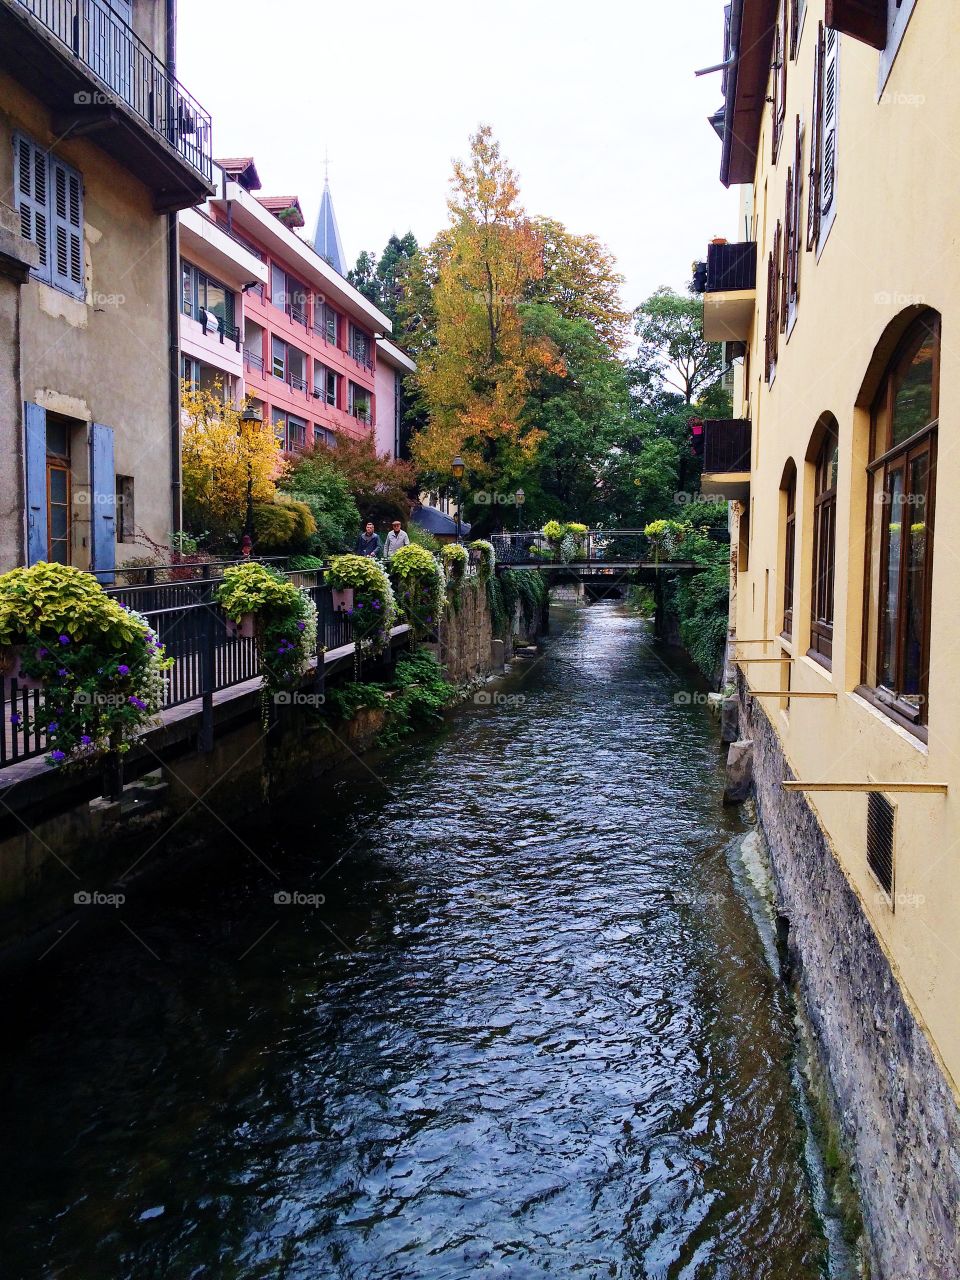 Annecy, French Alps